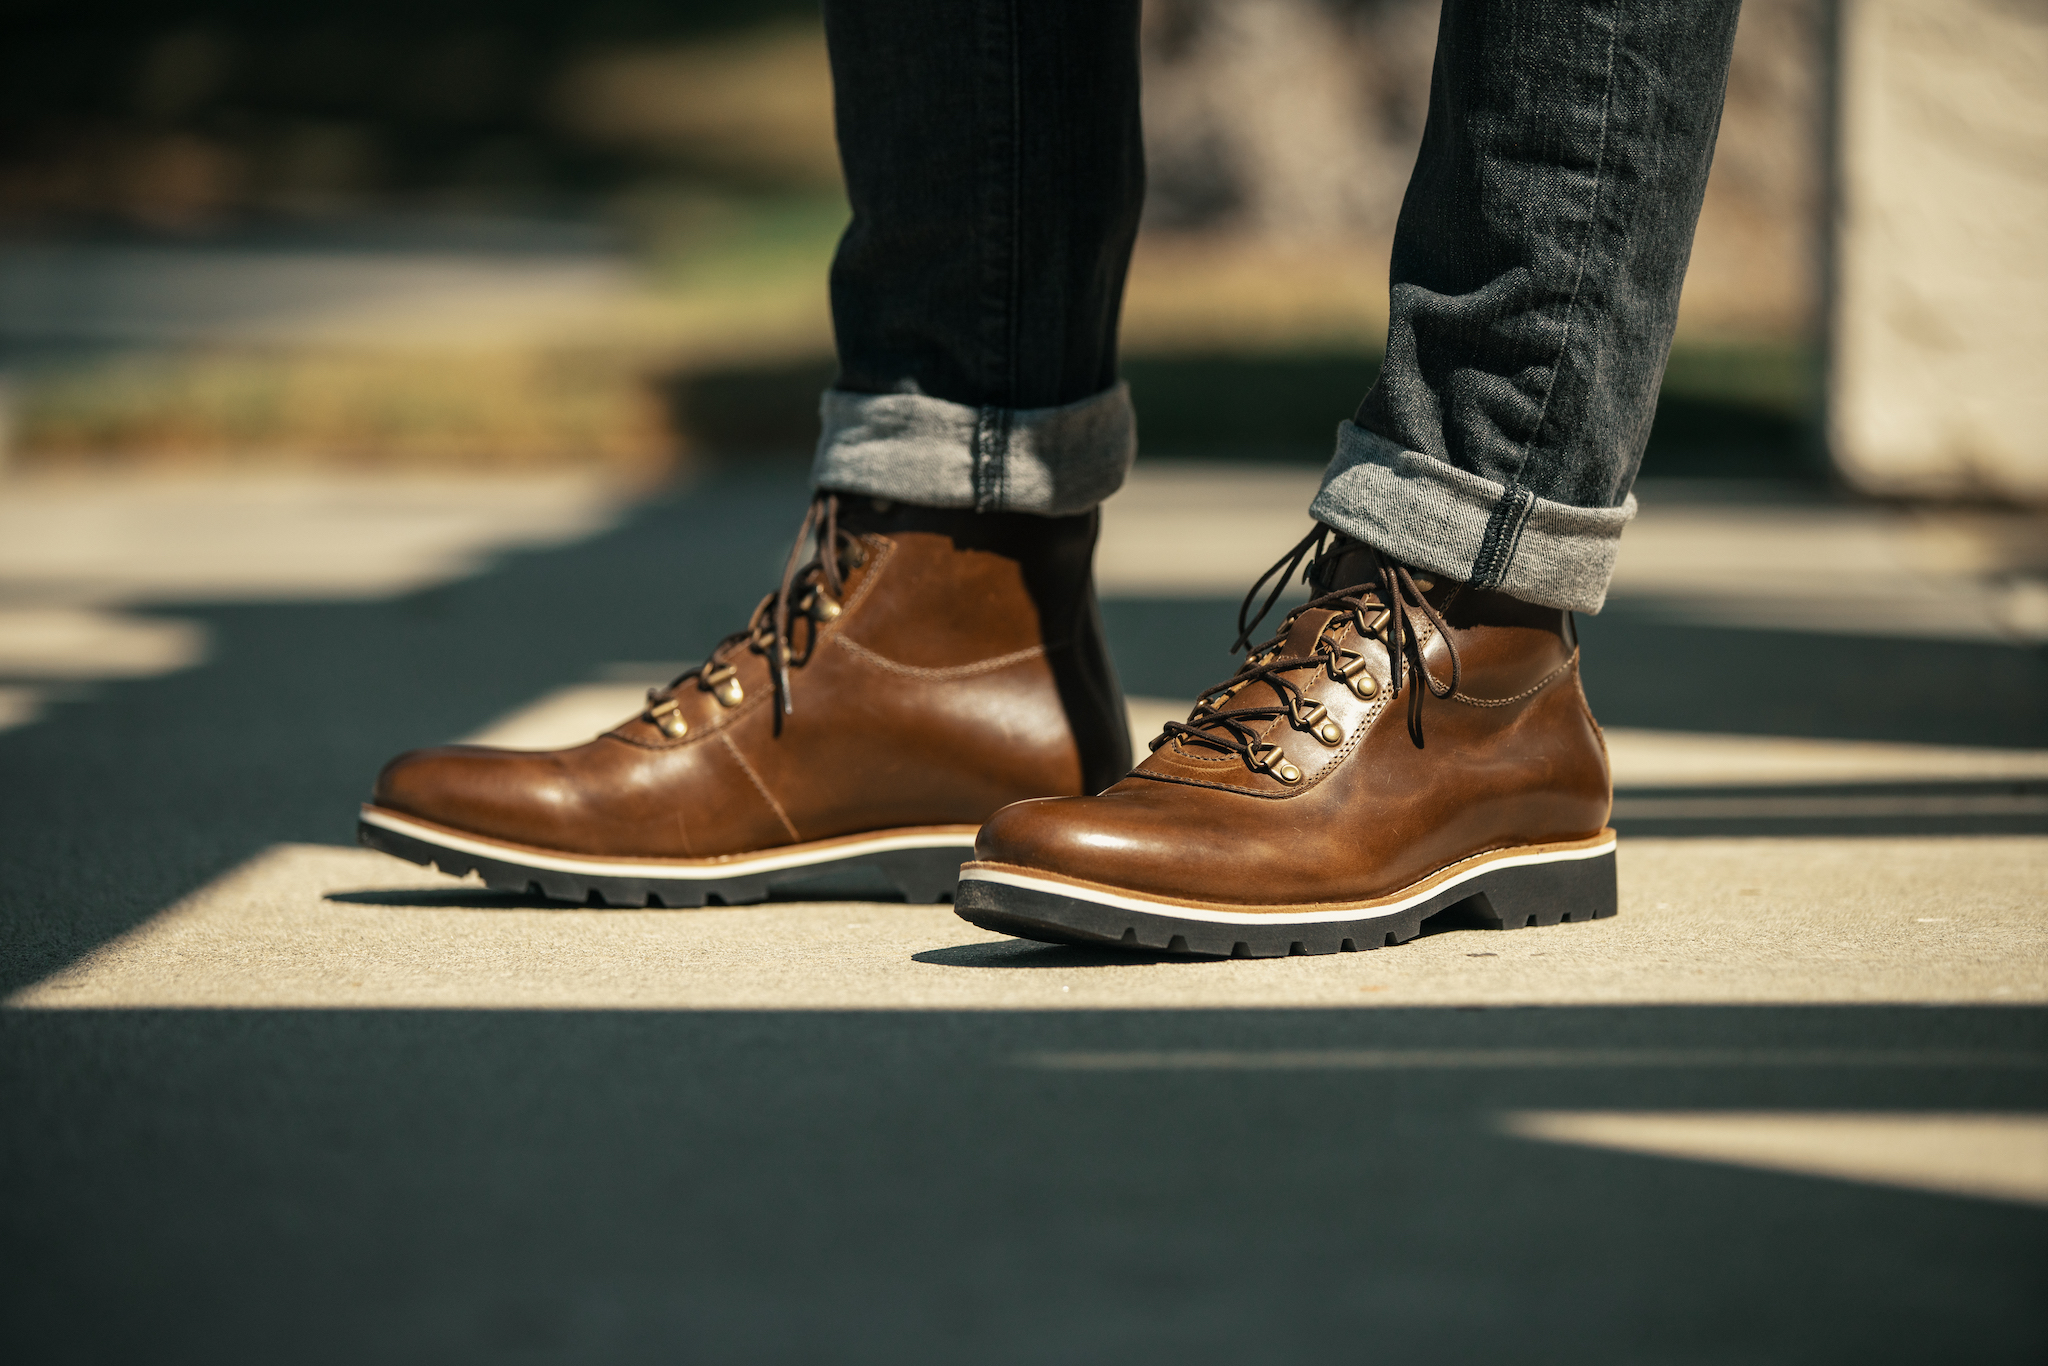 See Now, Buy Now: The HELM Boots Ryder Boots are the Best Boots for ...